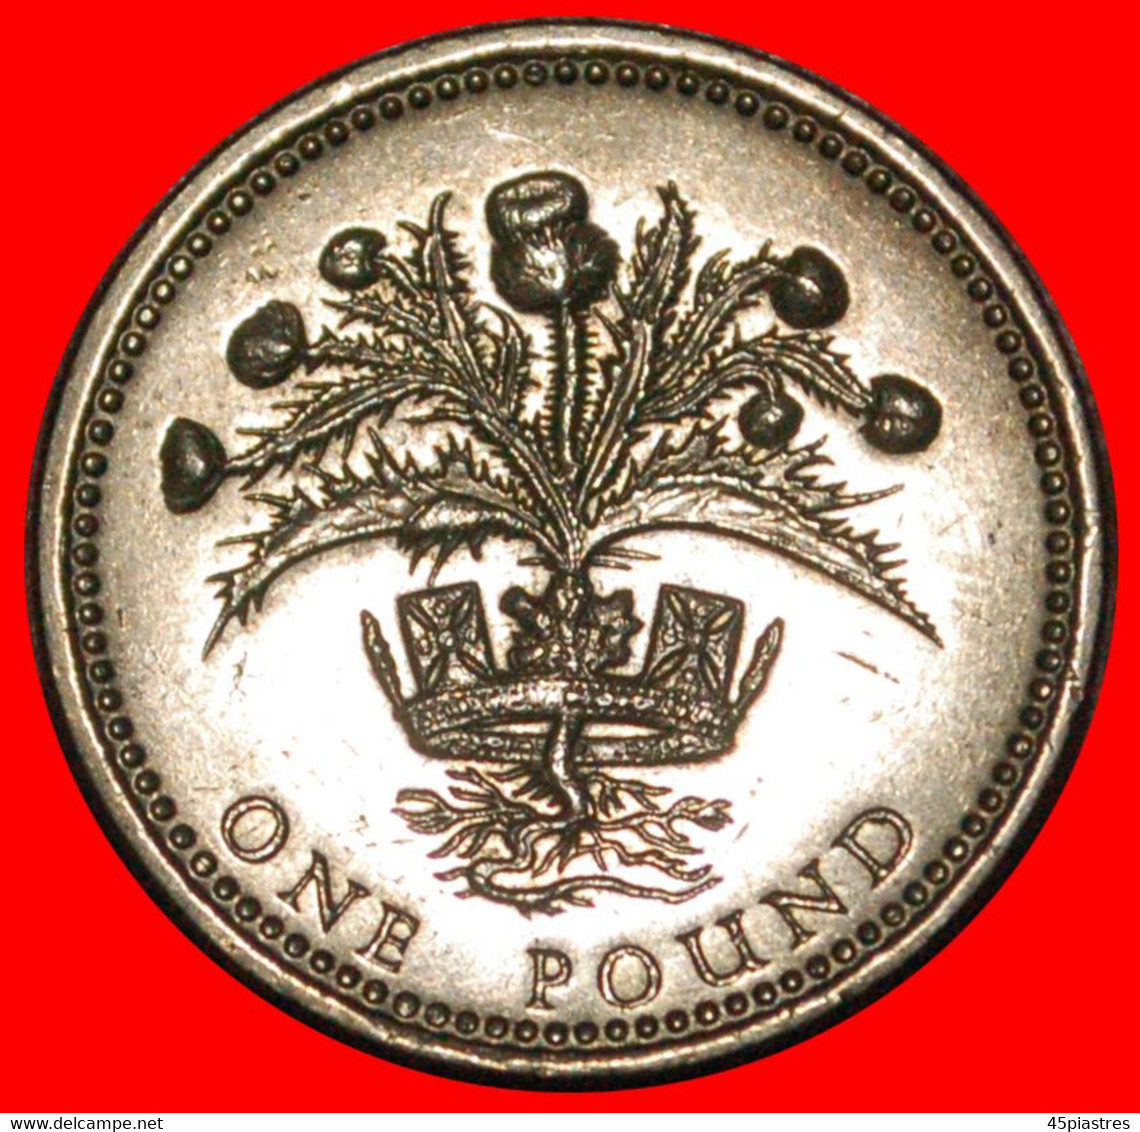 * THISTLE: GREAT BRITAIN ★ 1 POUND 1989 XF!  LOW START ★ NO RESERVE! - 1 Pound